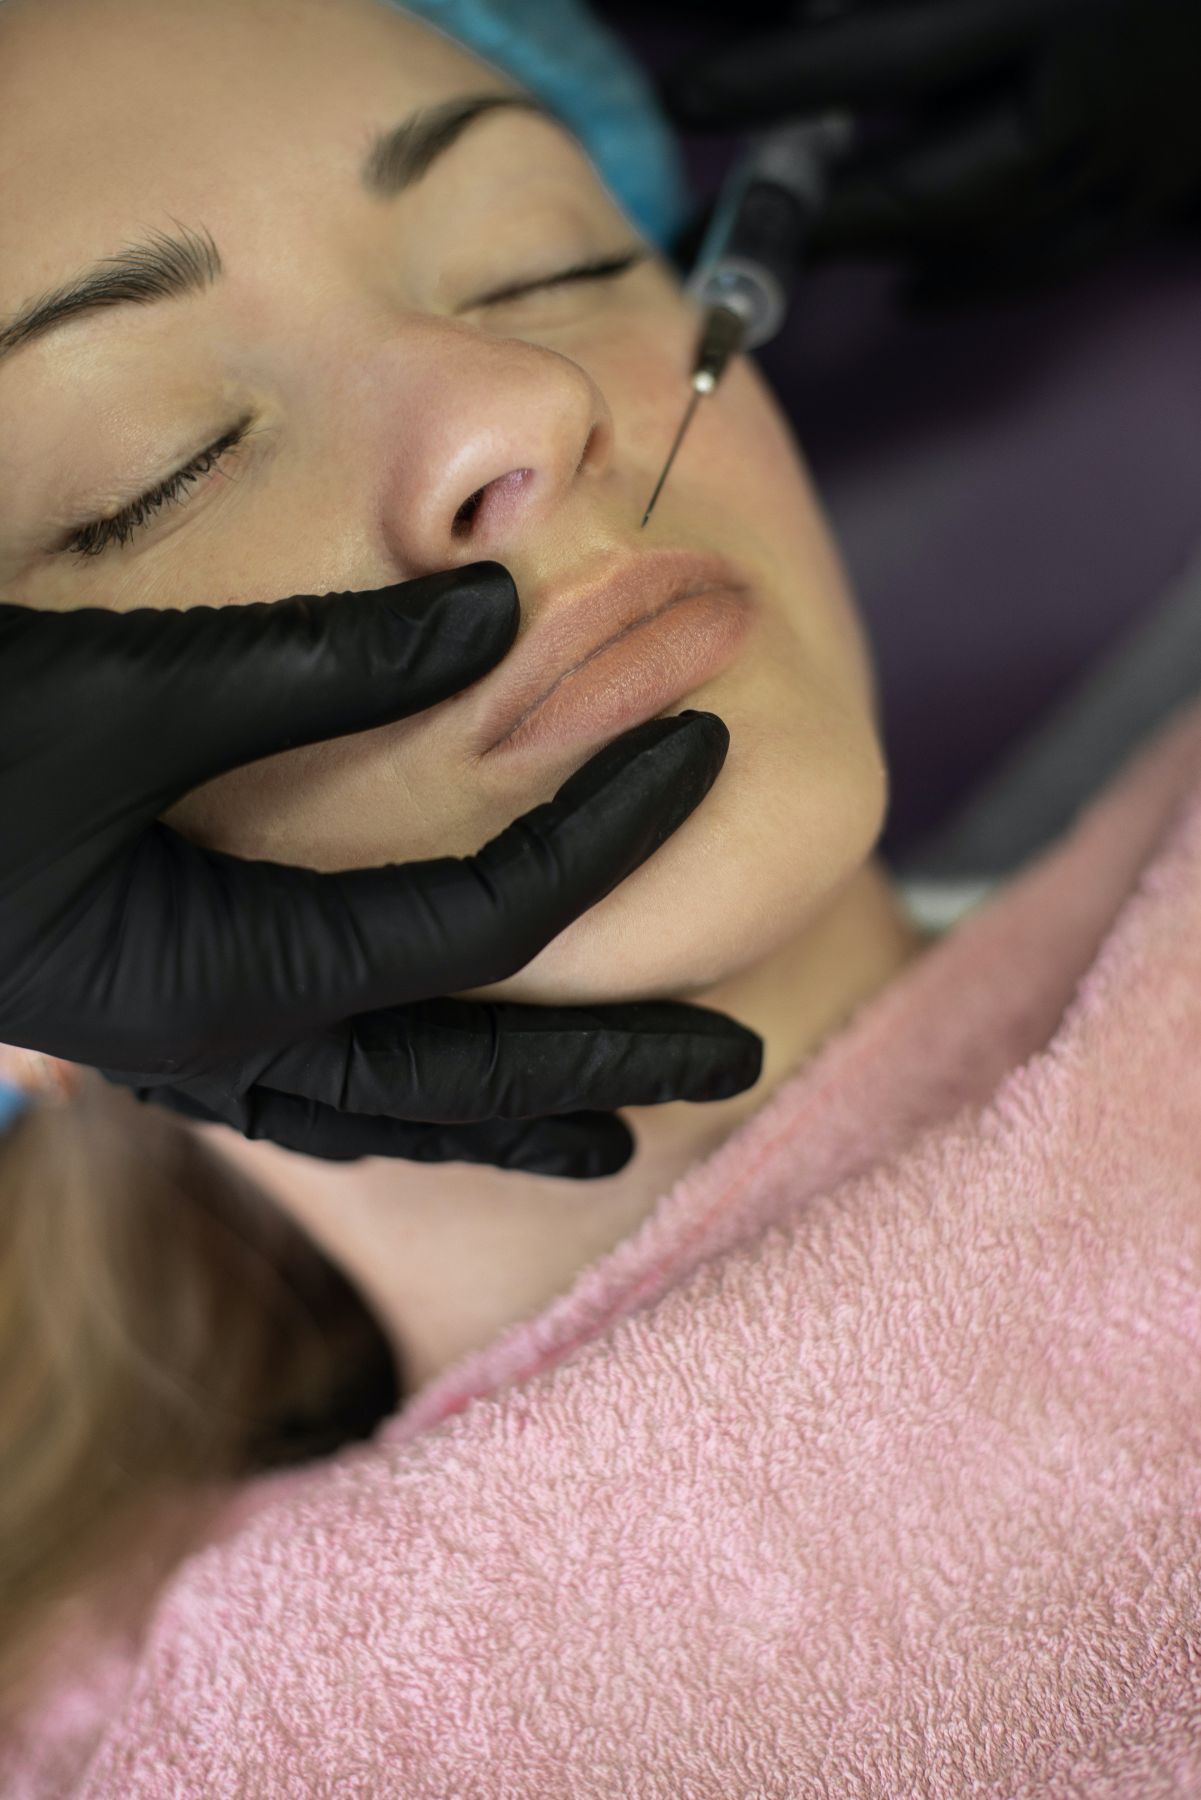 aesthetician injecting botox around a woman's mouth and smile